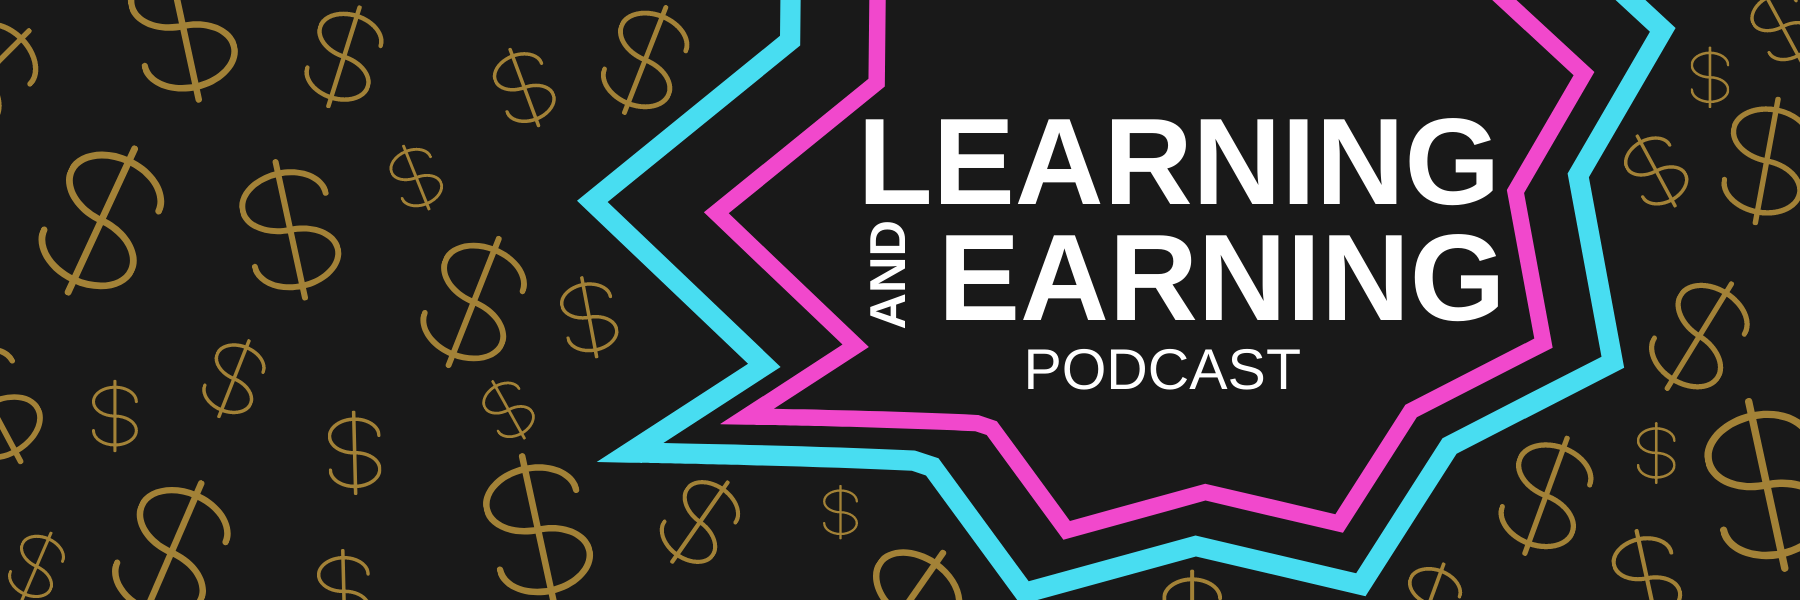 Black background with gold dollar signs. Large white words saying: Learning and Earning Podcast.